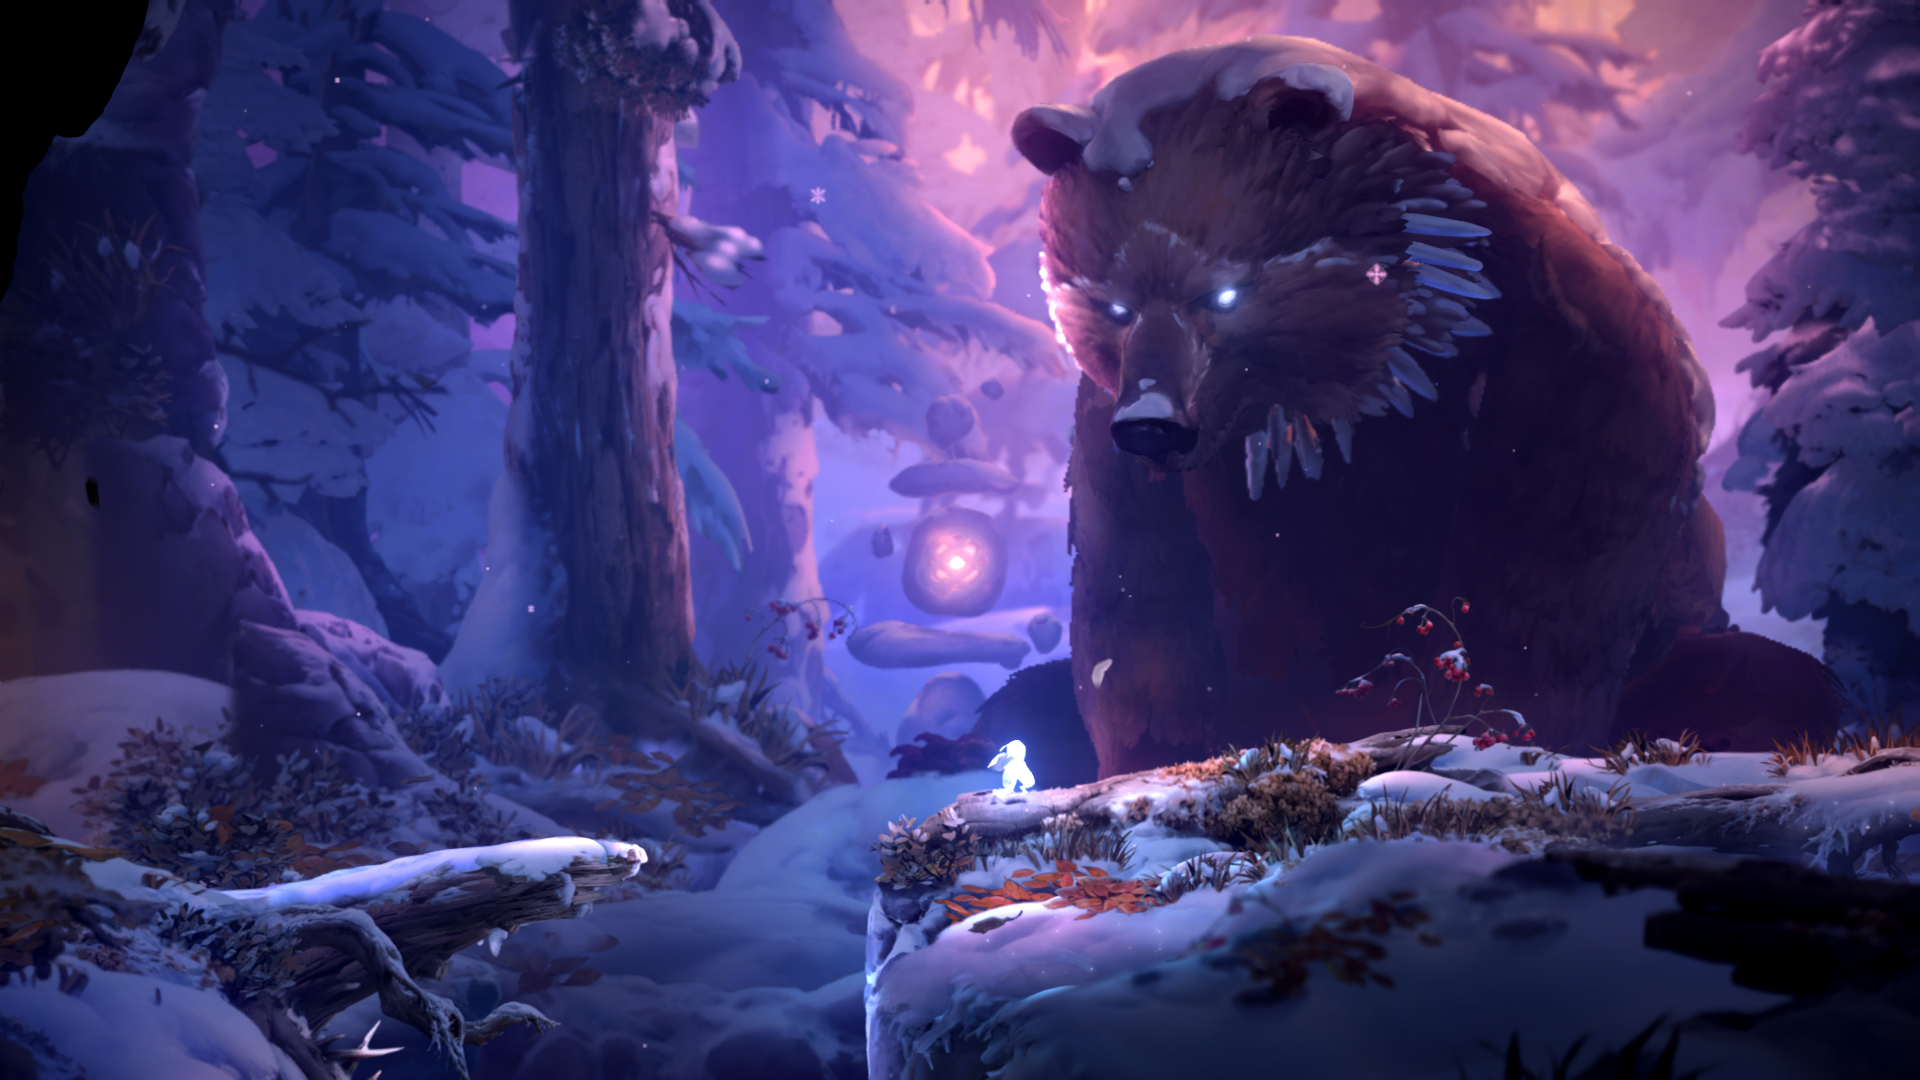 ori and the will of the wisps, video game, bear